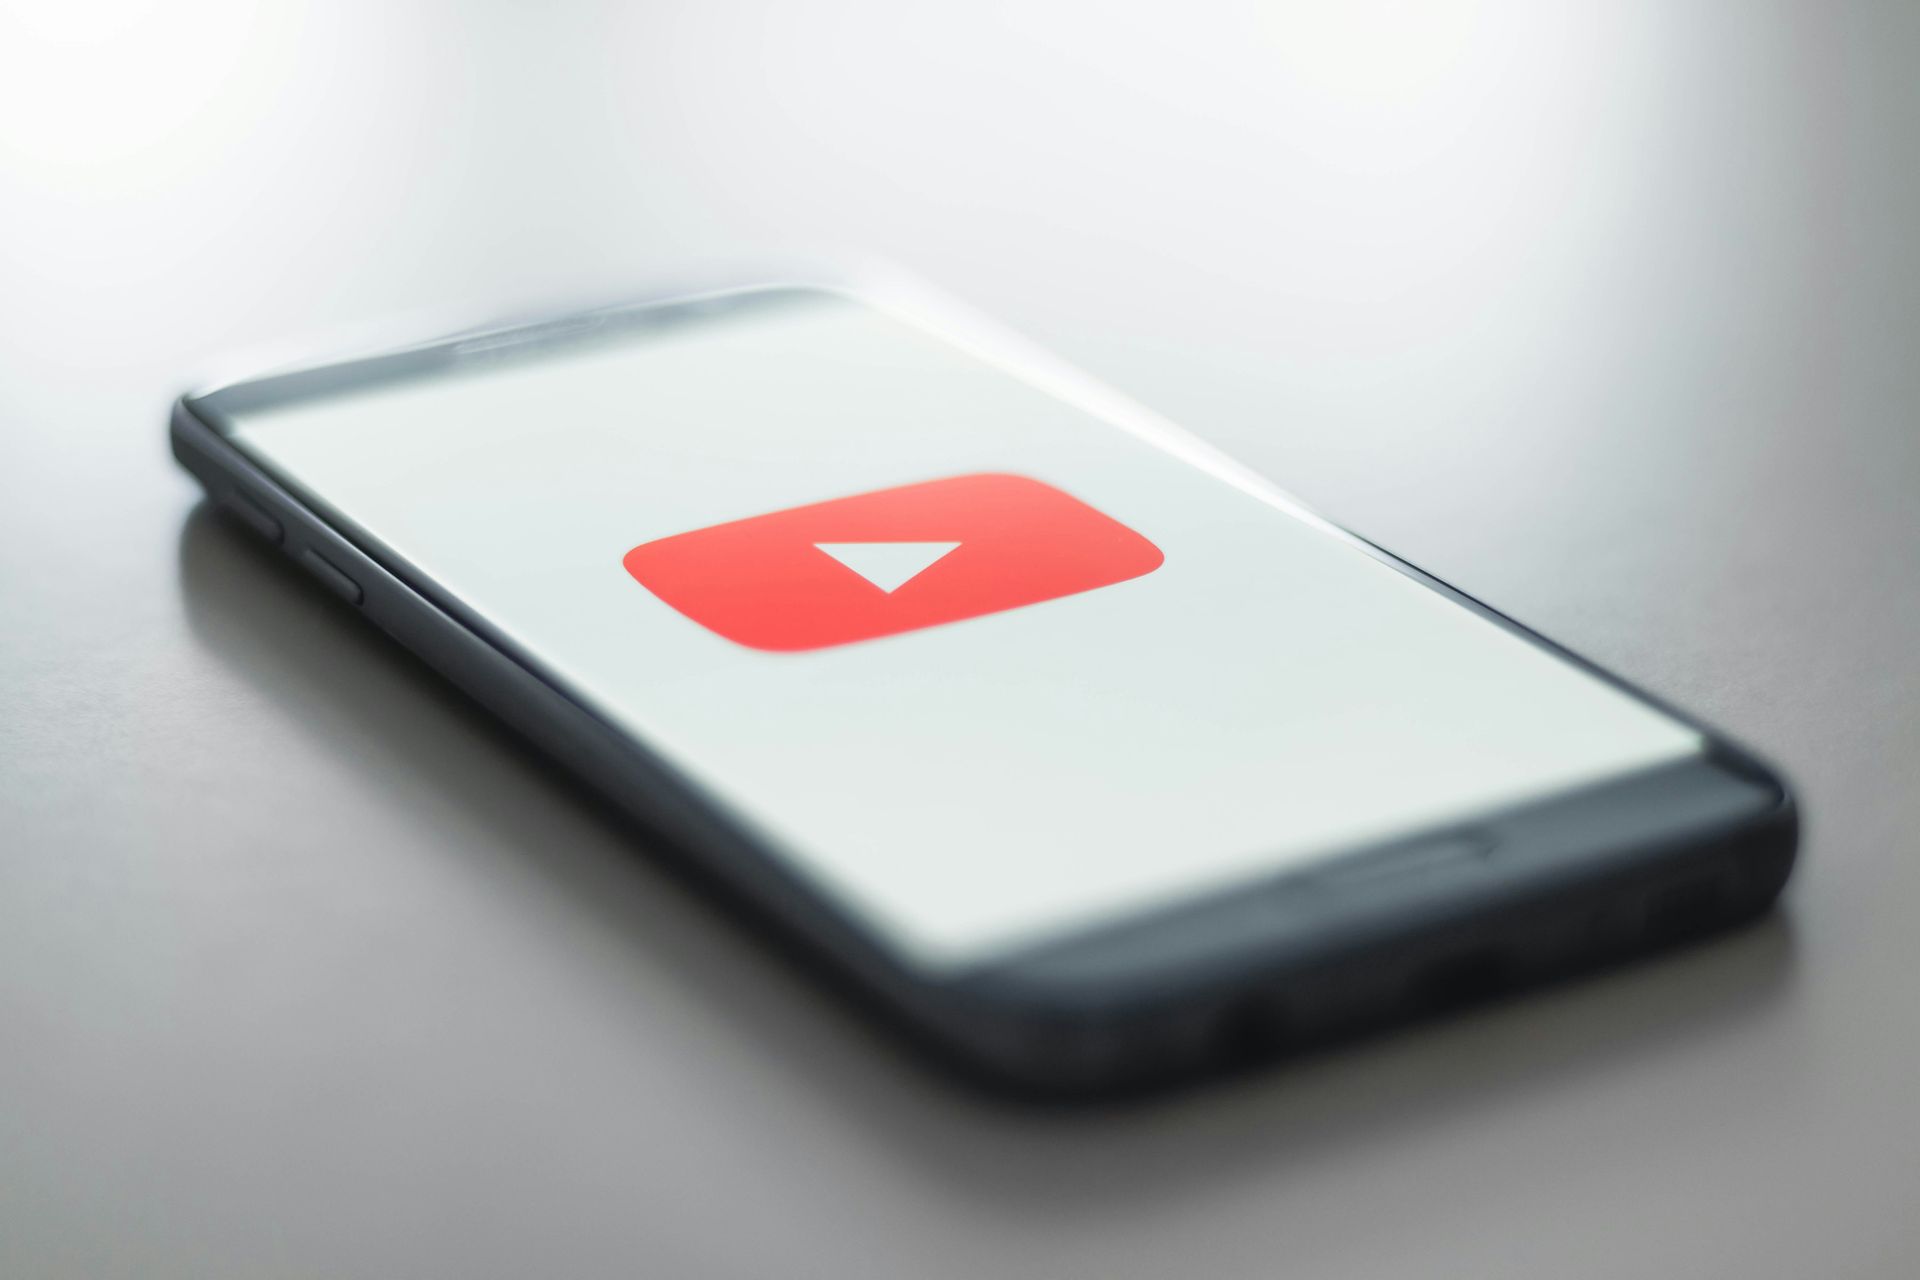 YouTube Premium offers new features and plans to enhance the user experience